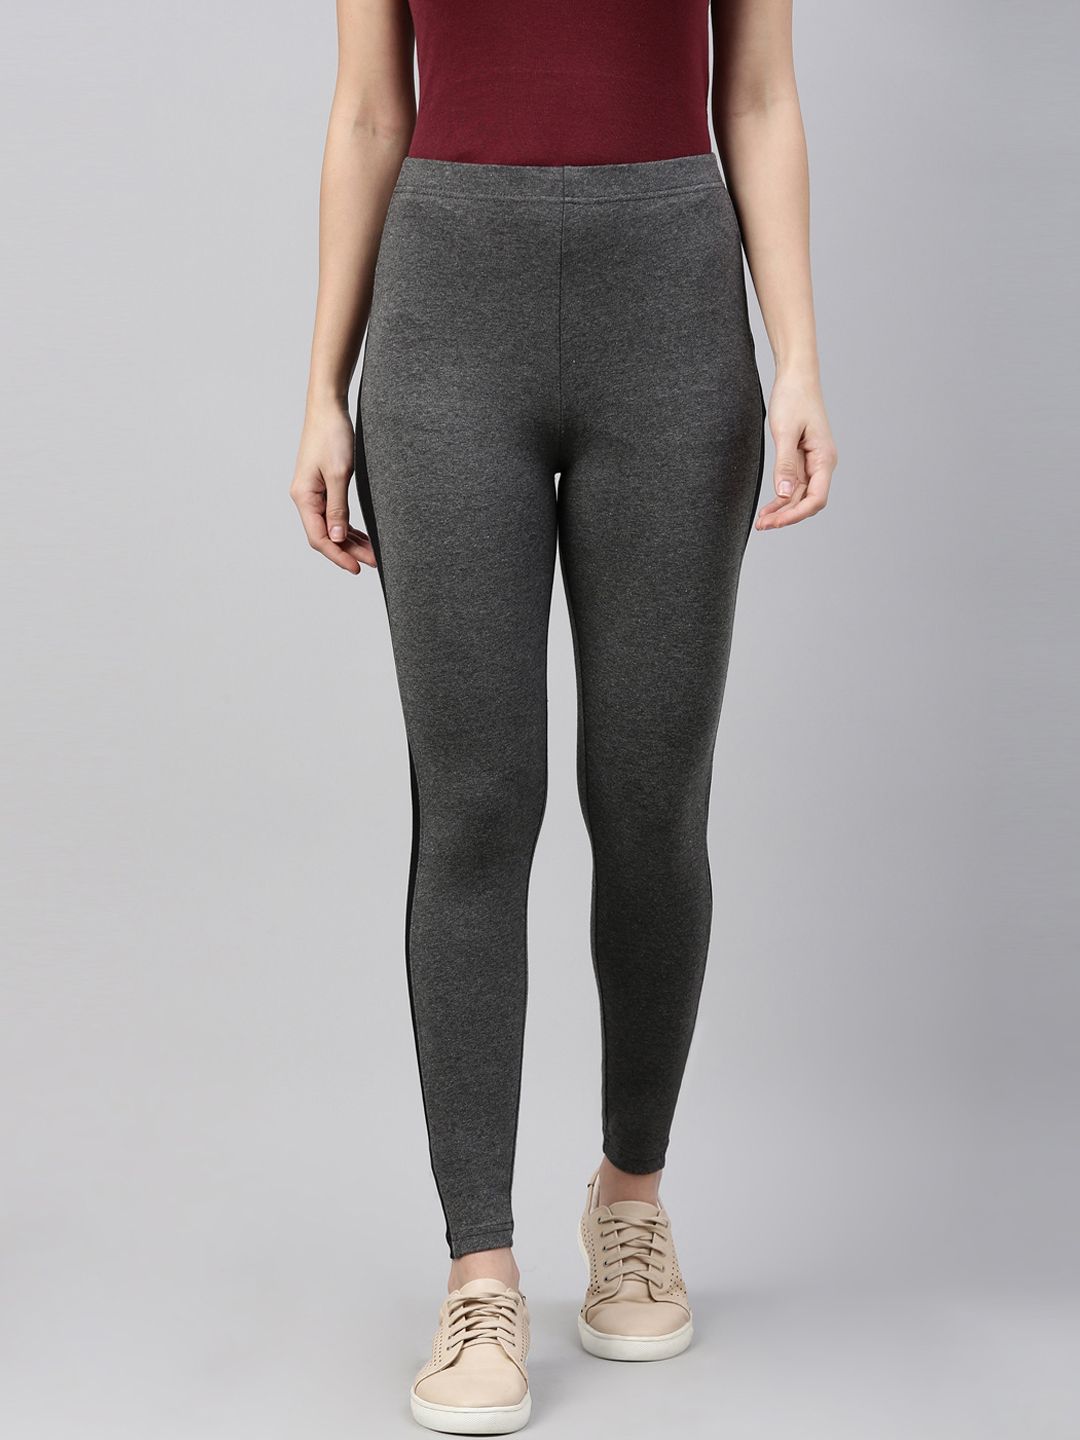 Go Colors Women Grey Solid Ankle Length Leggings Price in India